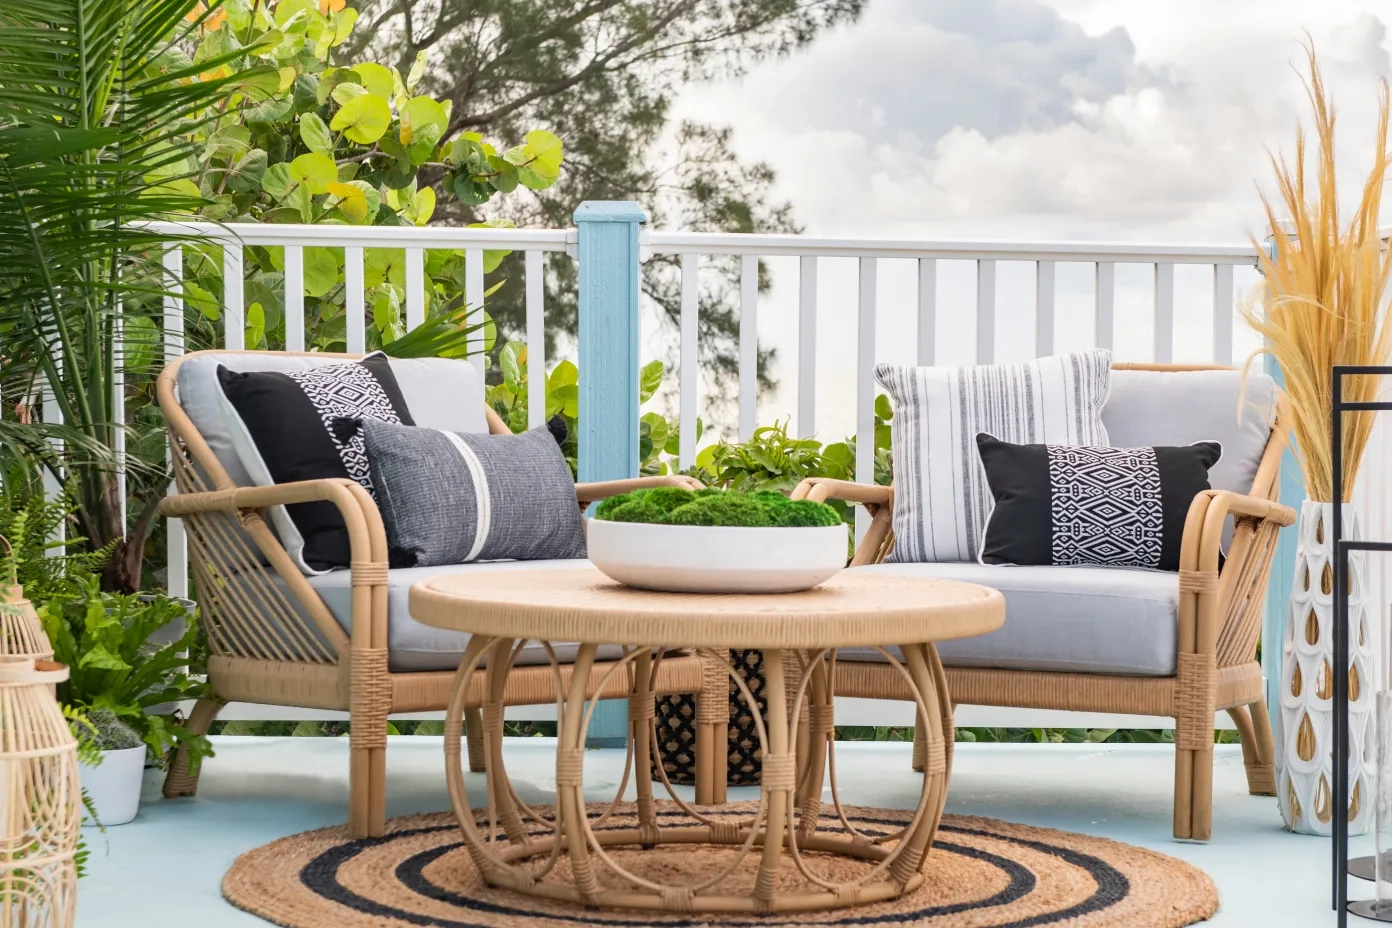 How To Decorate a Blue and Yellow Patio: Ideas, Design & Decor